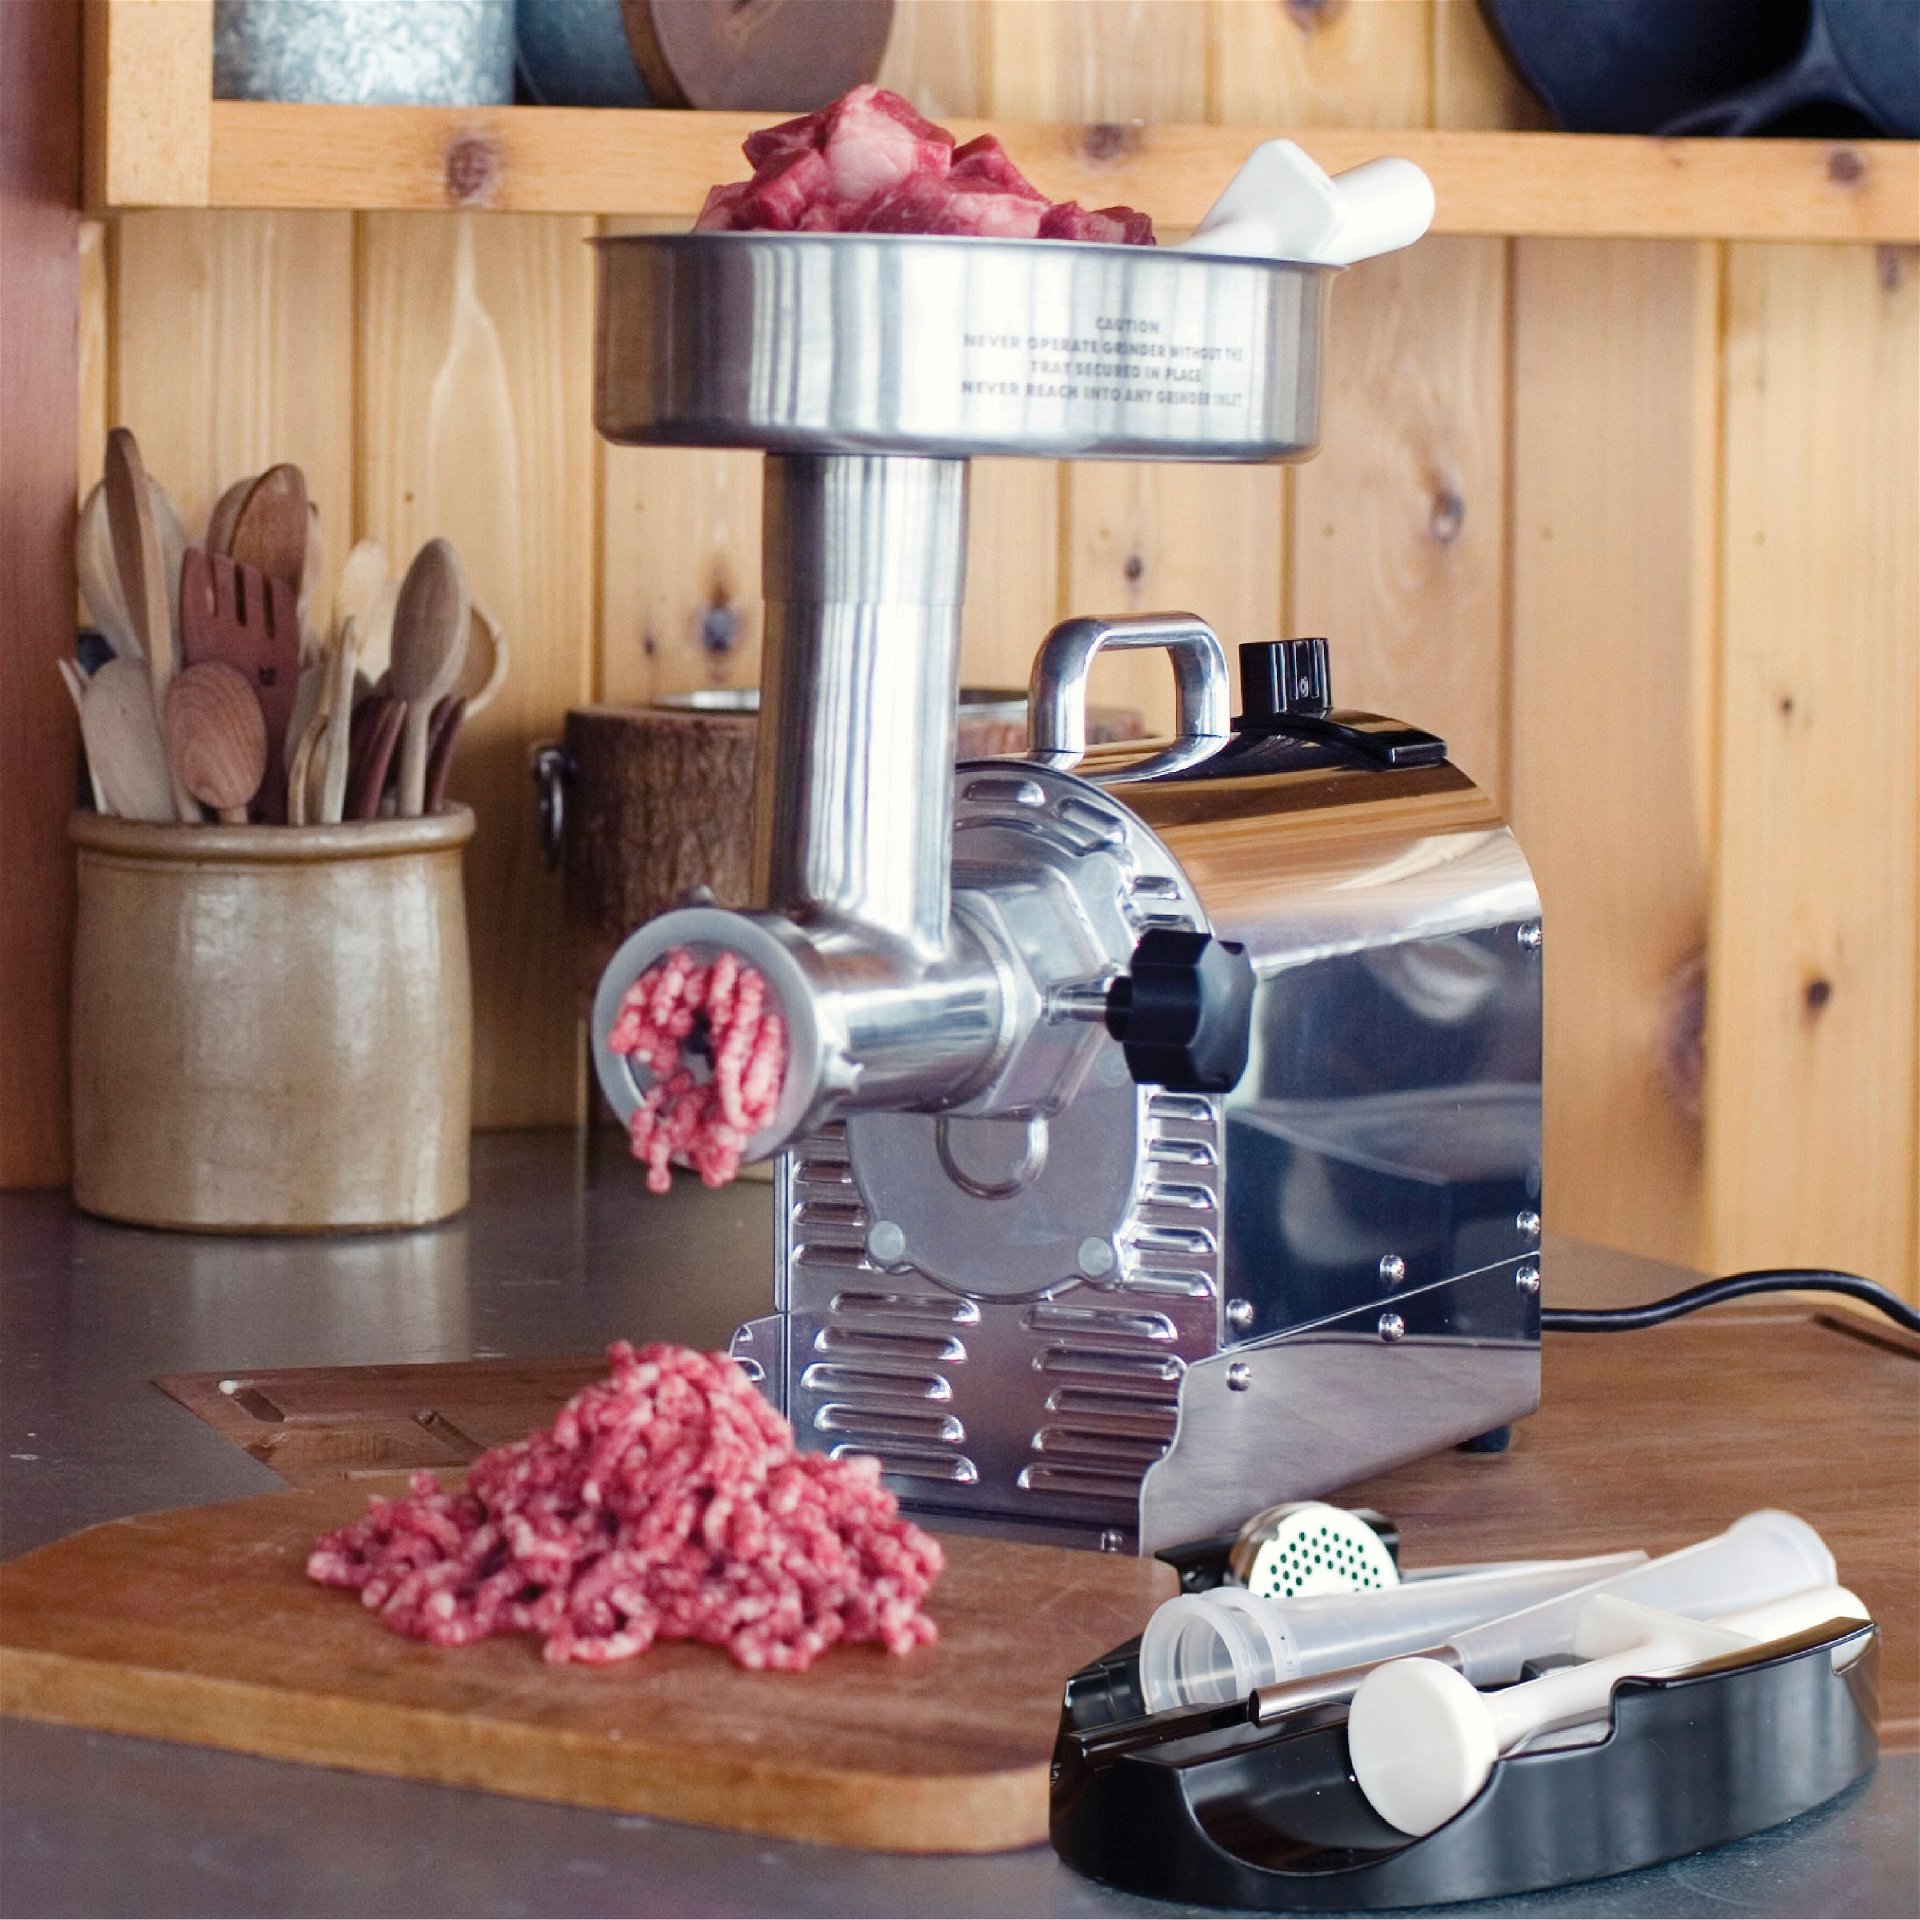 https://cdn.everythingkitchens.com/media/catalog/product/cache/70d878061ea71e5b62358b2b67547186/w/e/weston_pro_series_8_meat_grinder_meat_grinders_10-0801-w.jpg